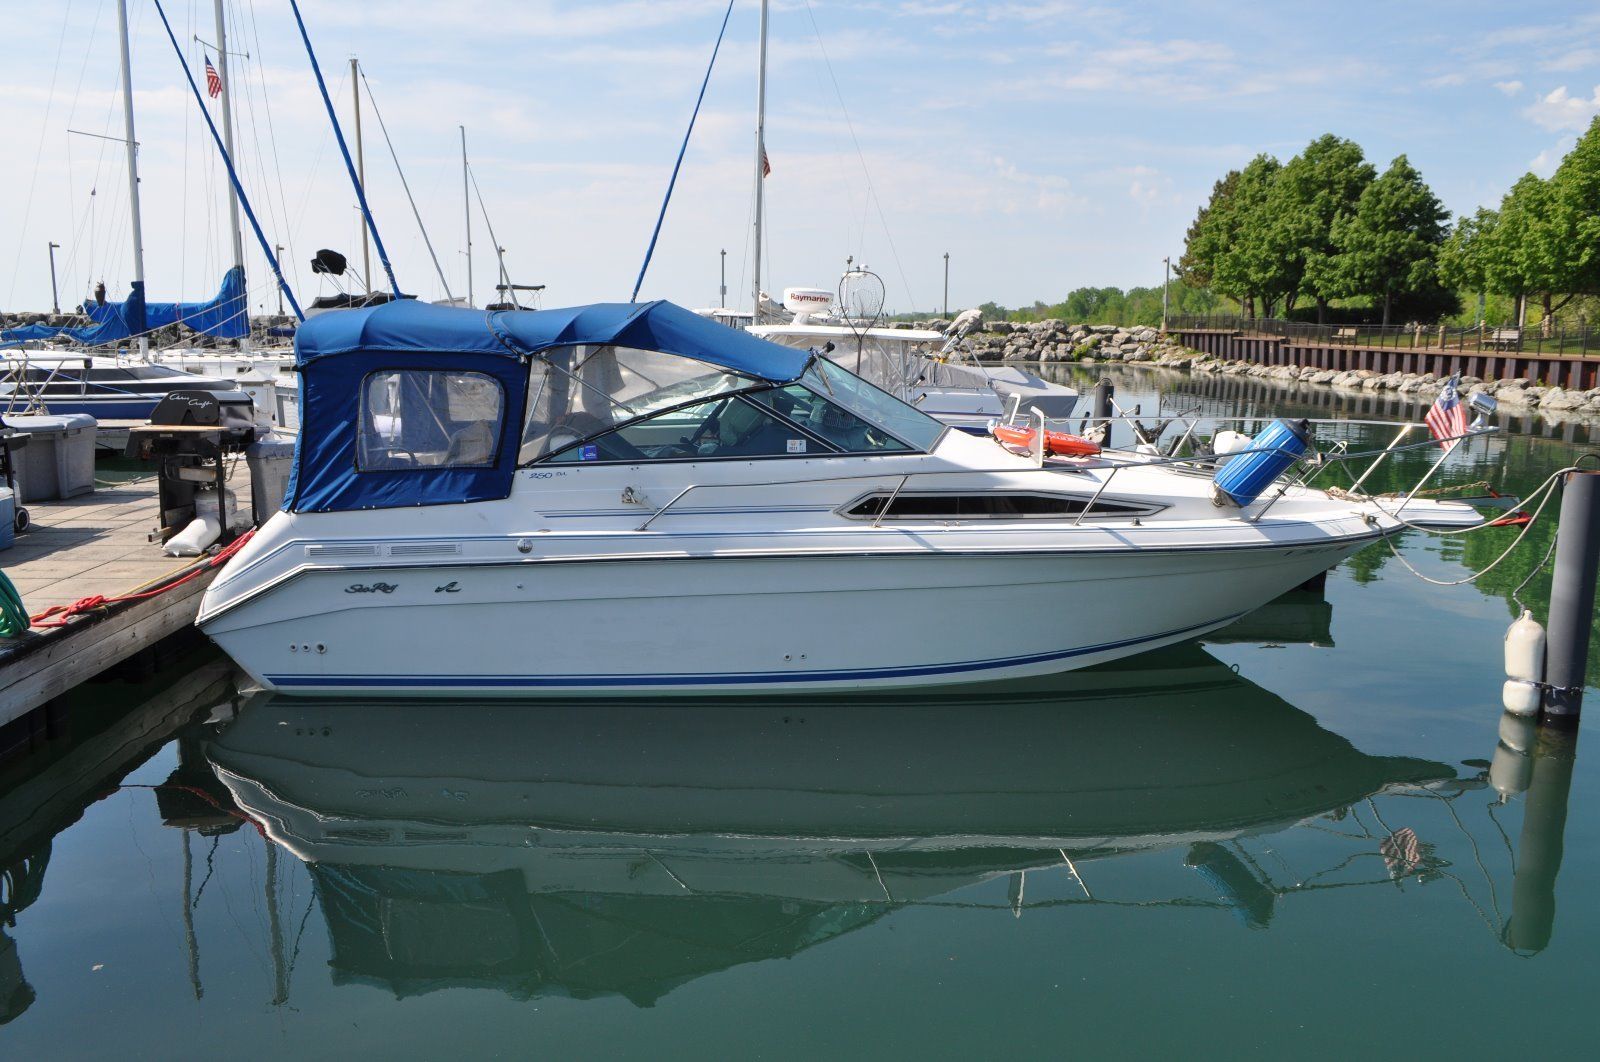 Sea Ray 1990 for sale for 10,500